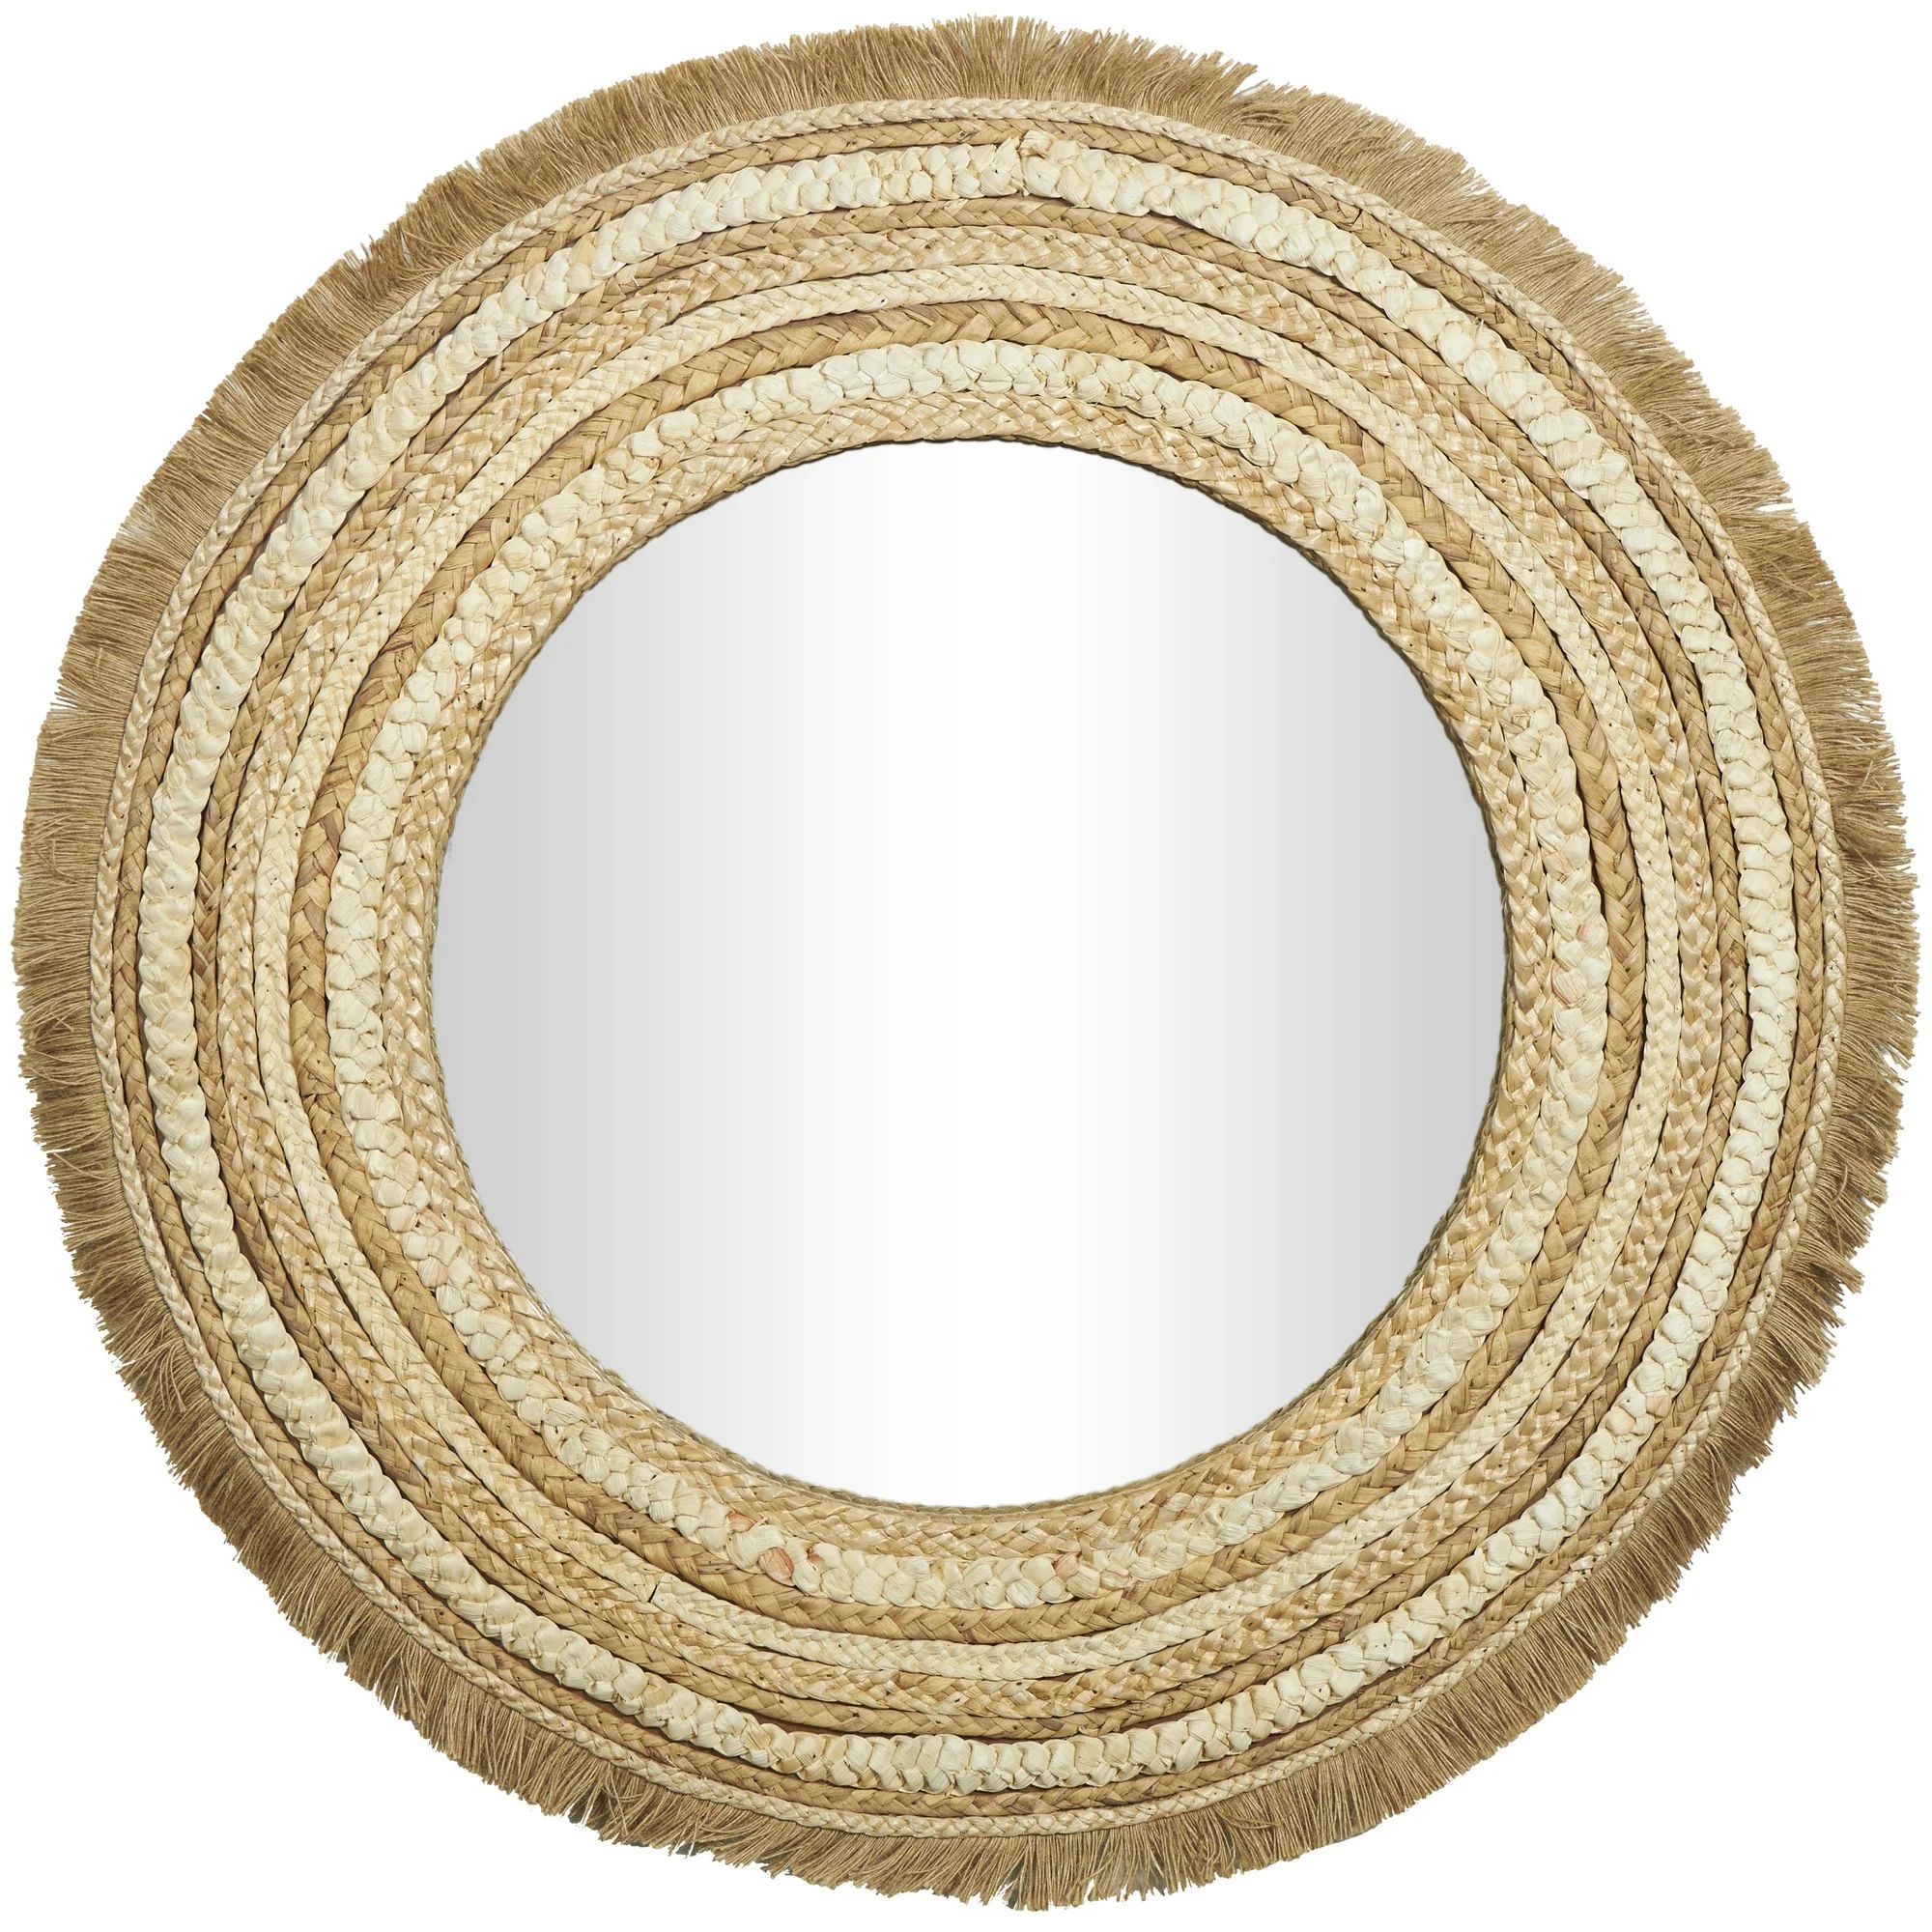 DecMode 38" x 38" Beige Woven Wall Mirror with Fringe Ends | Walmart (US)